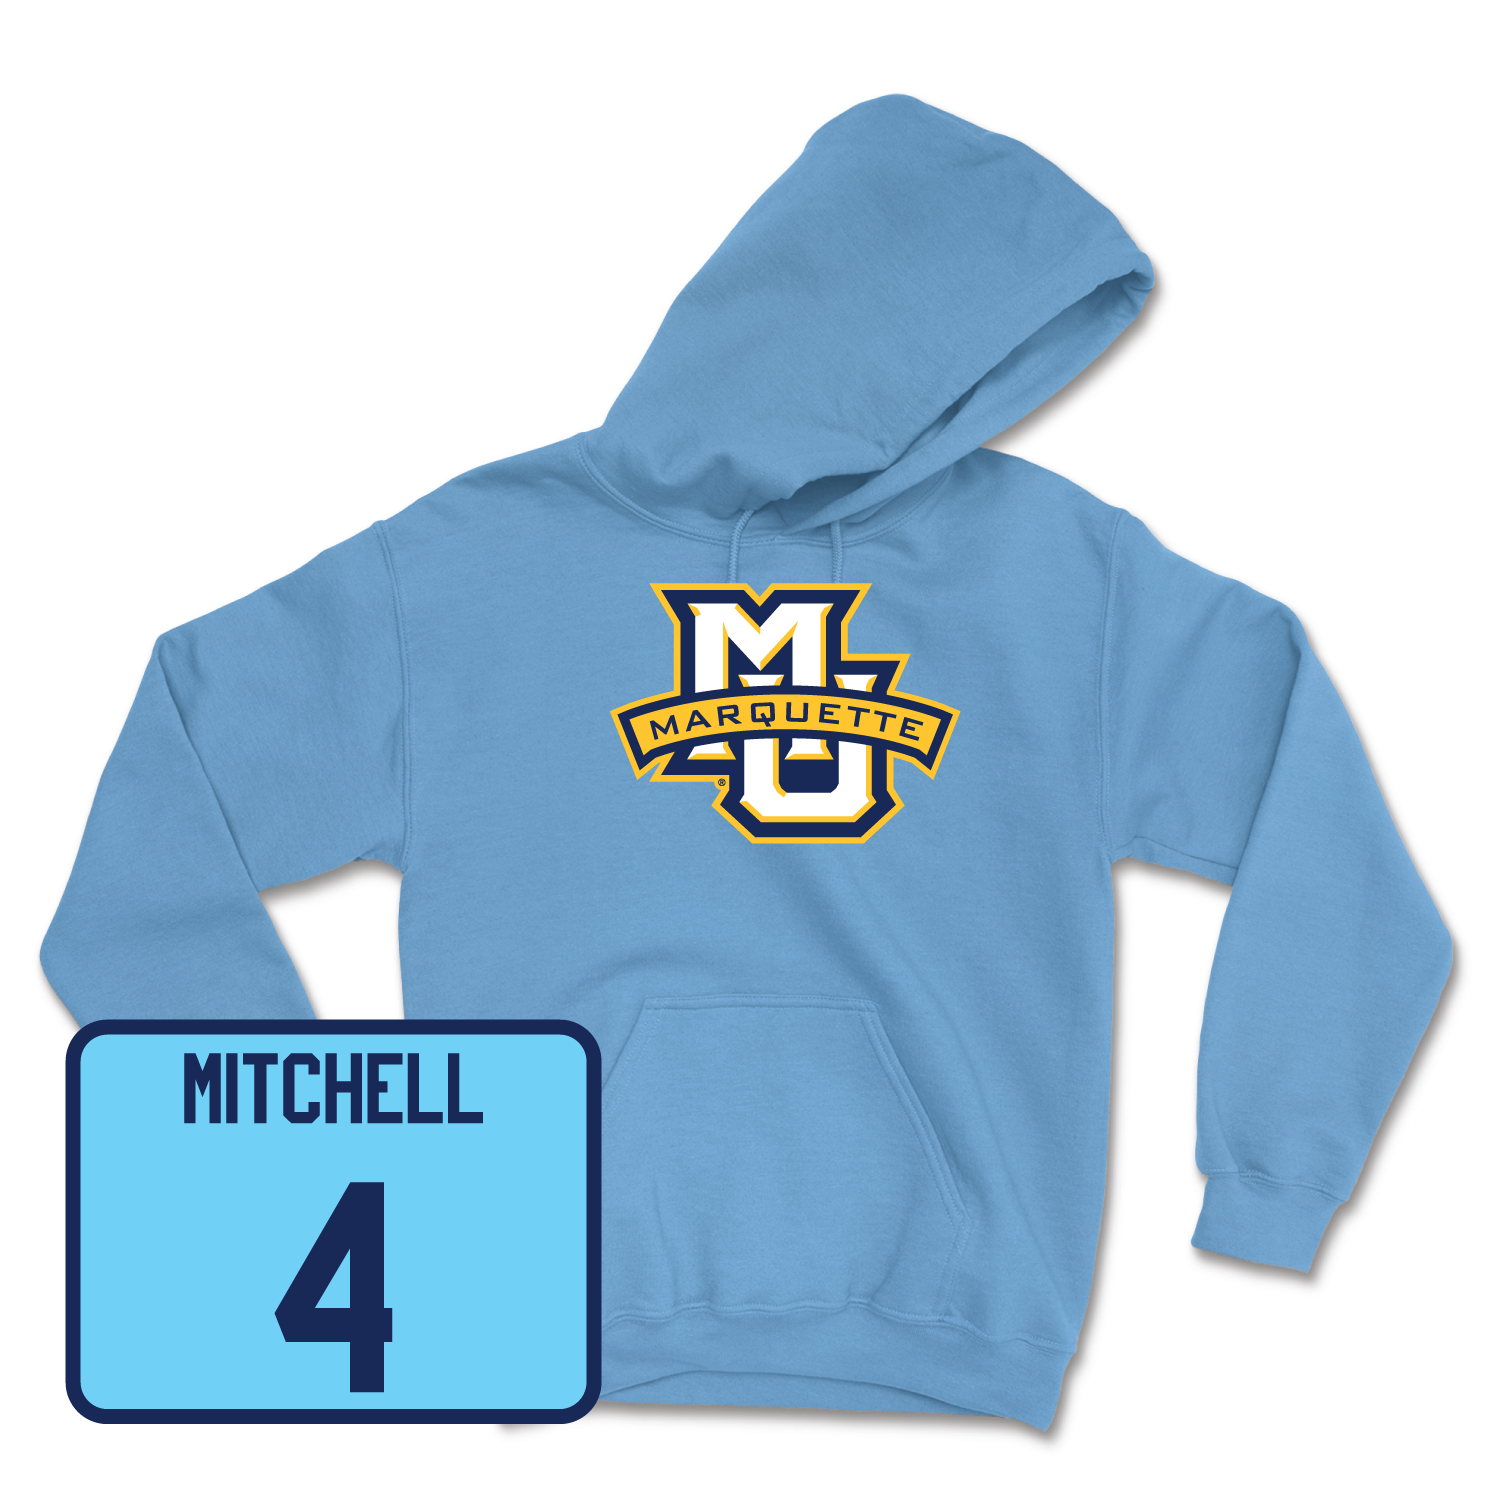 Championship Blue Men's Basketball Marquette Hoodie 2 3X-Large / Stevie Mitchell | #4